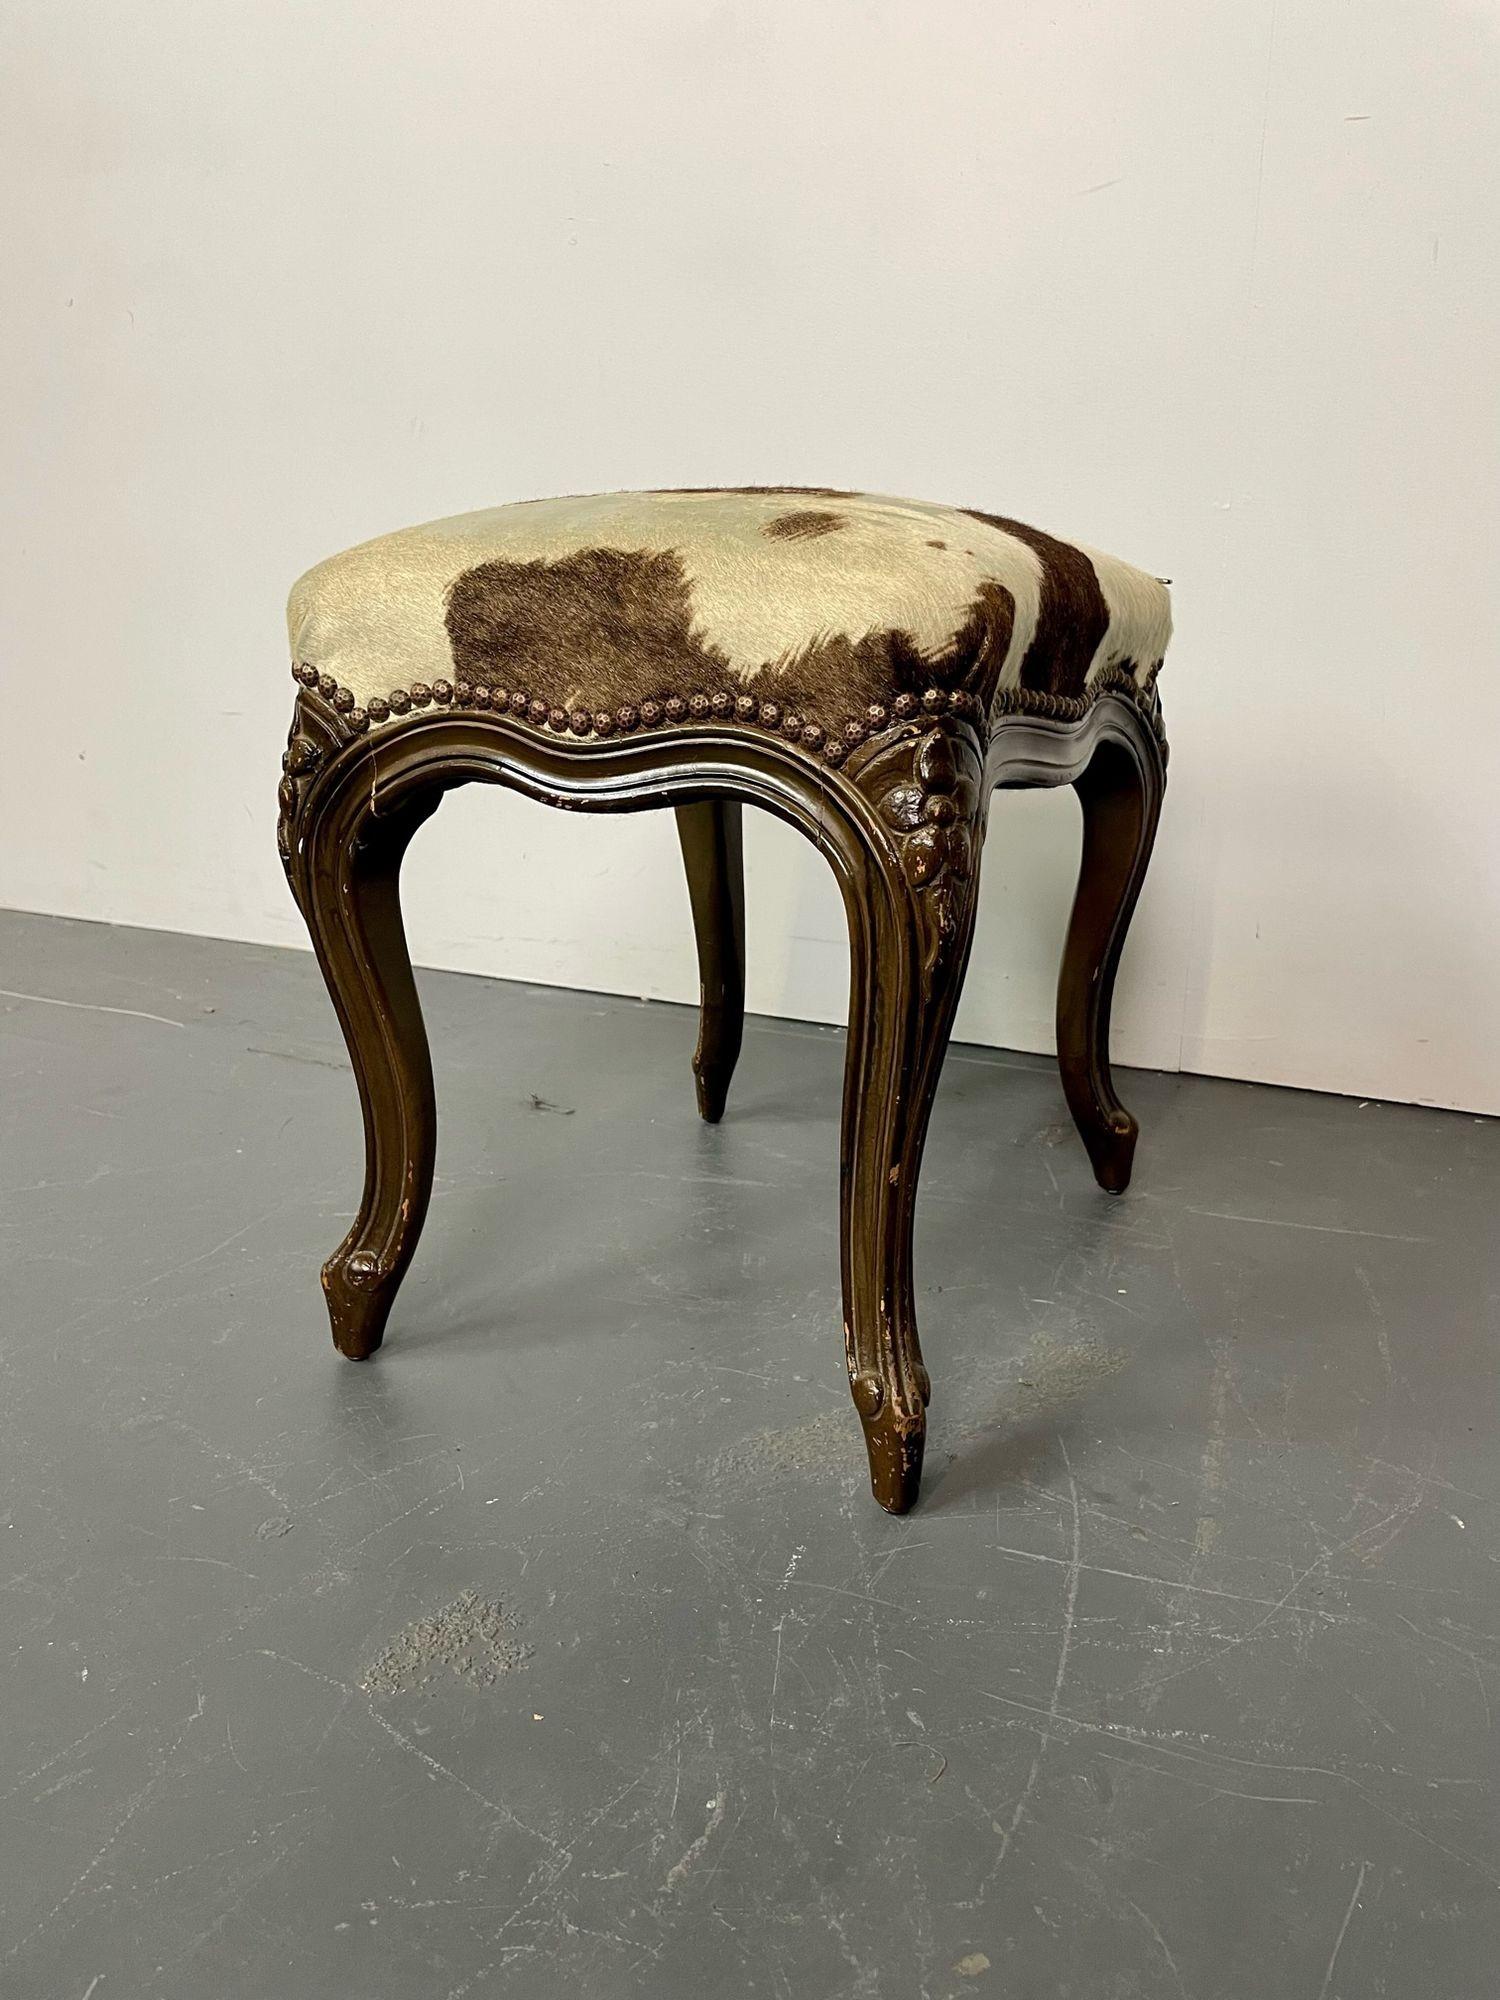 Pony Skin Upholstered, Bench or Foot Stool with Brass Tack Detailing In Good Condition For Sale In Stamford, CT